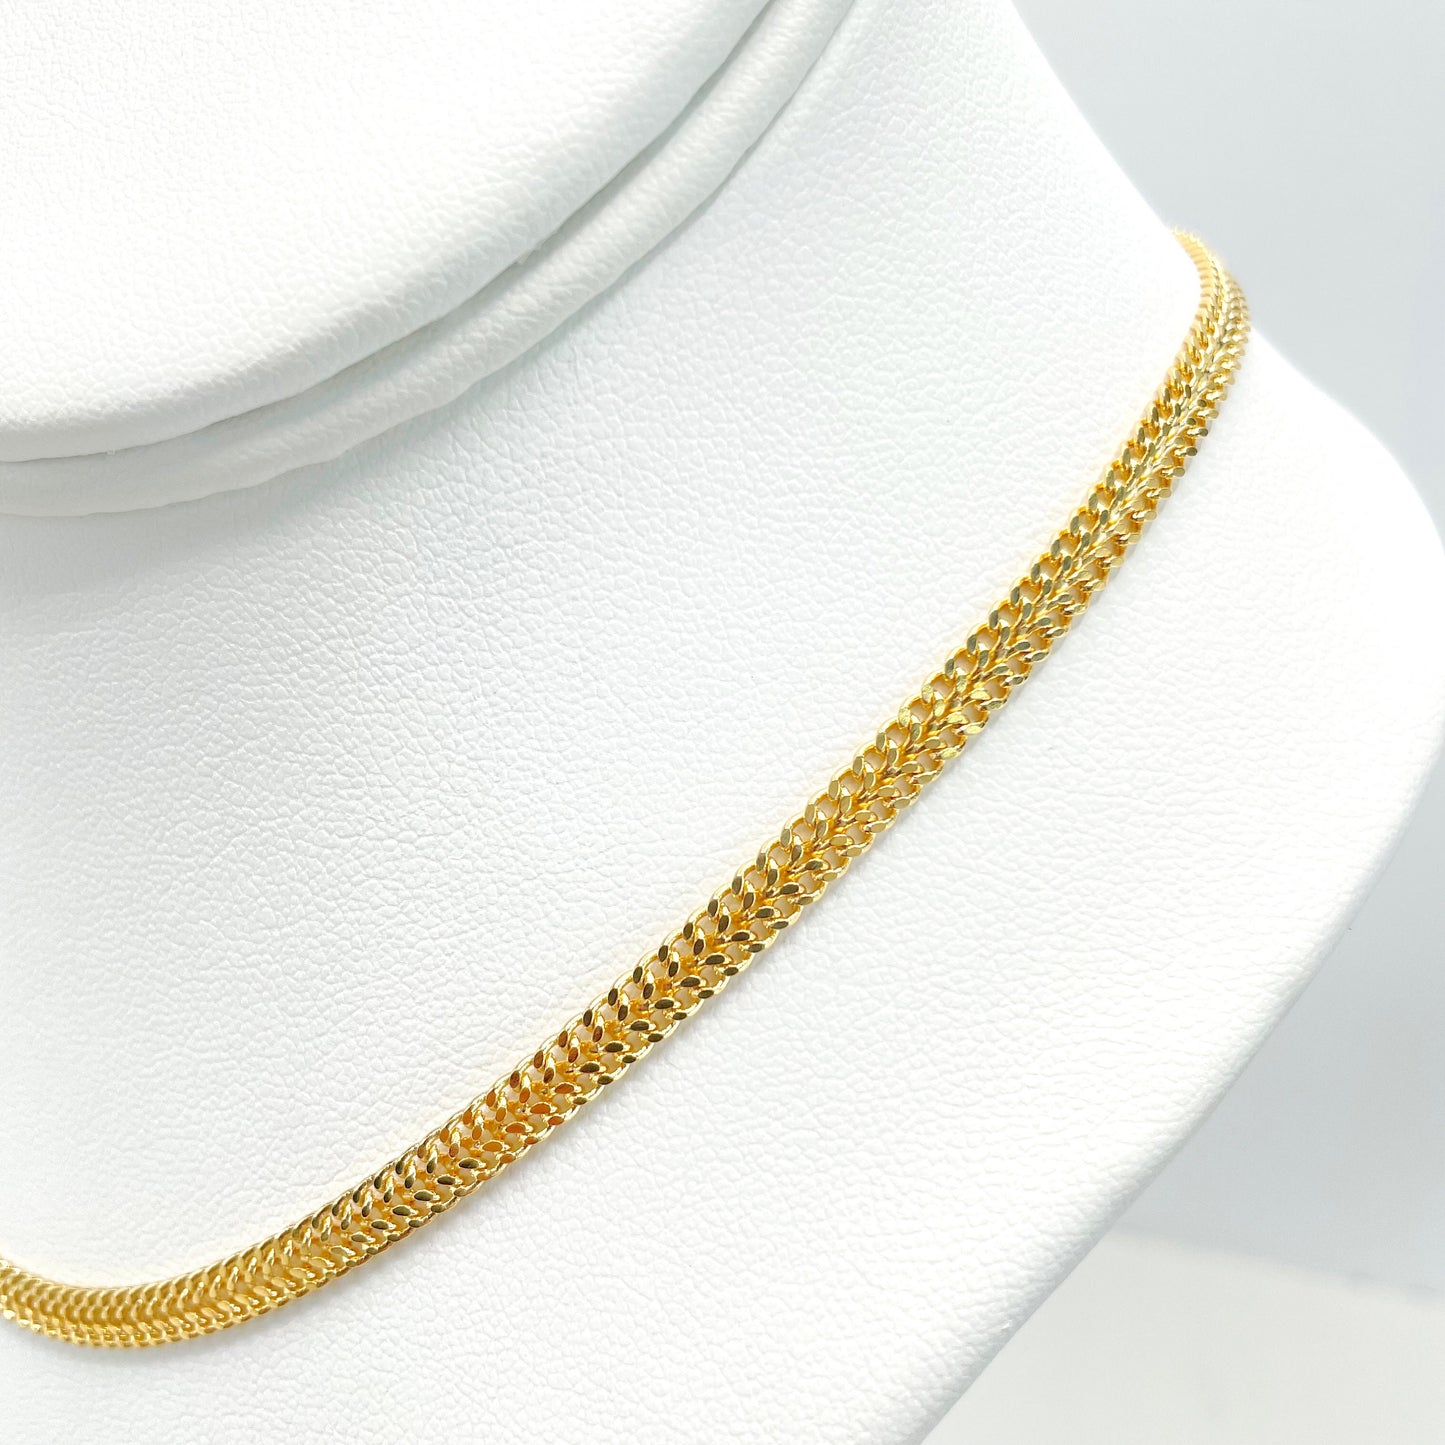 18k Gold Filled 4mm Flat Mat Chain, Double Curb Link Chain Choker or Bracelet, Wholesale Jewelry Making Supplies